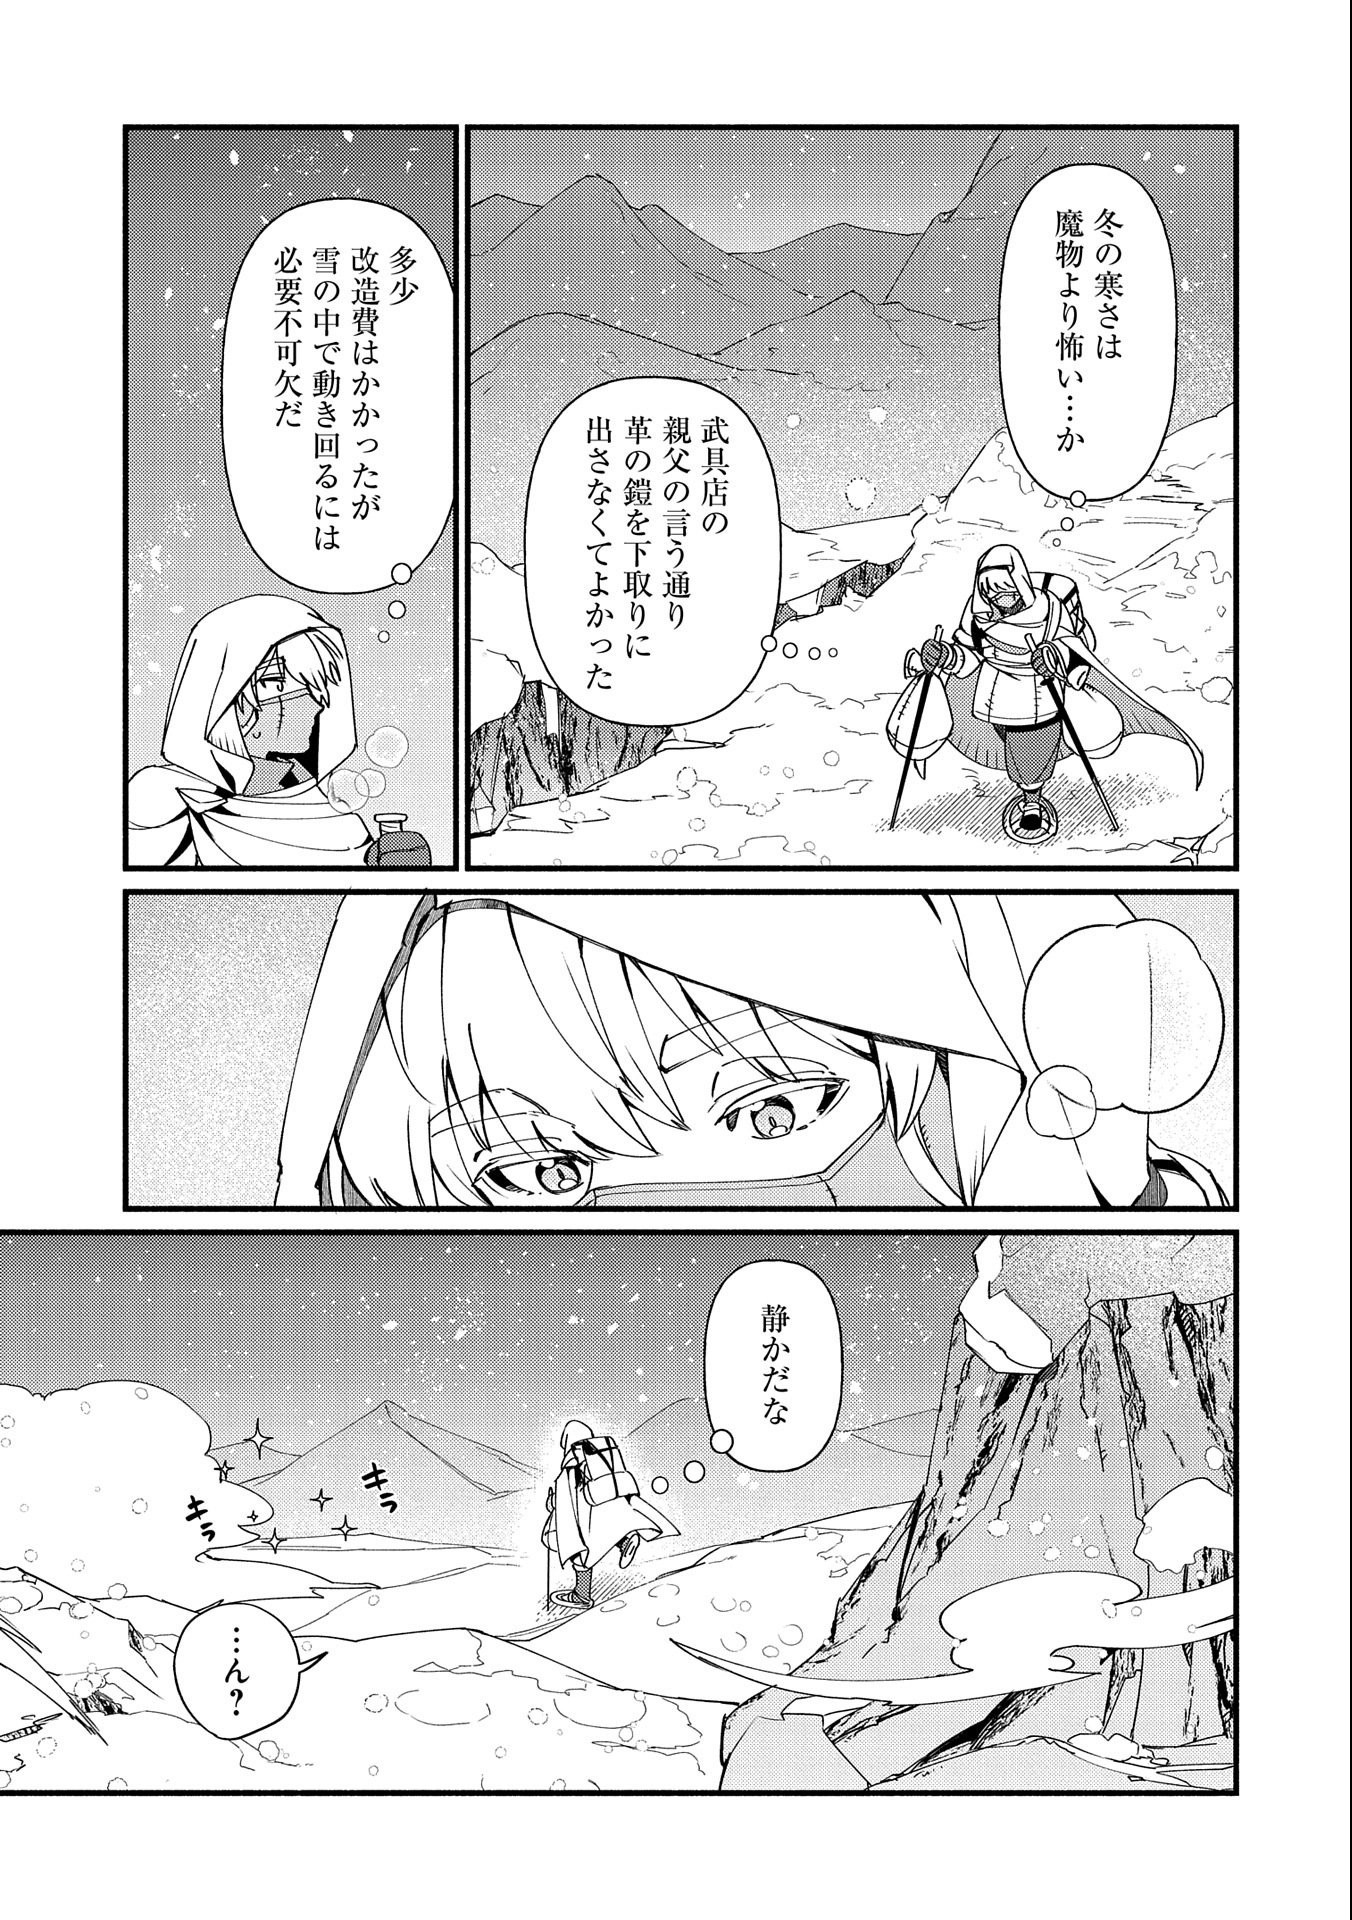 Nord’s Adventure 第10.1話 - Page 5